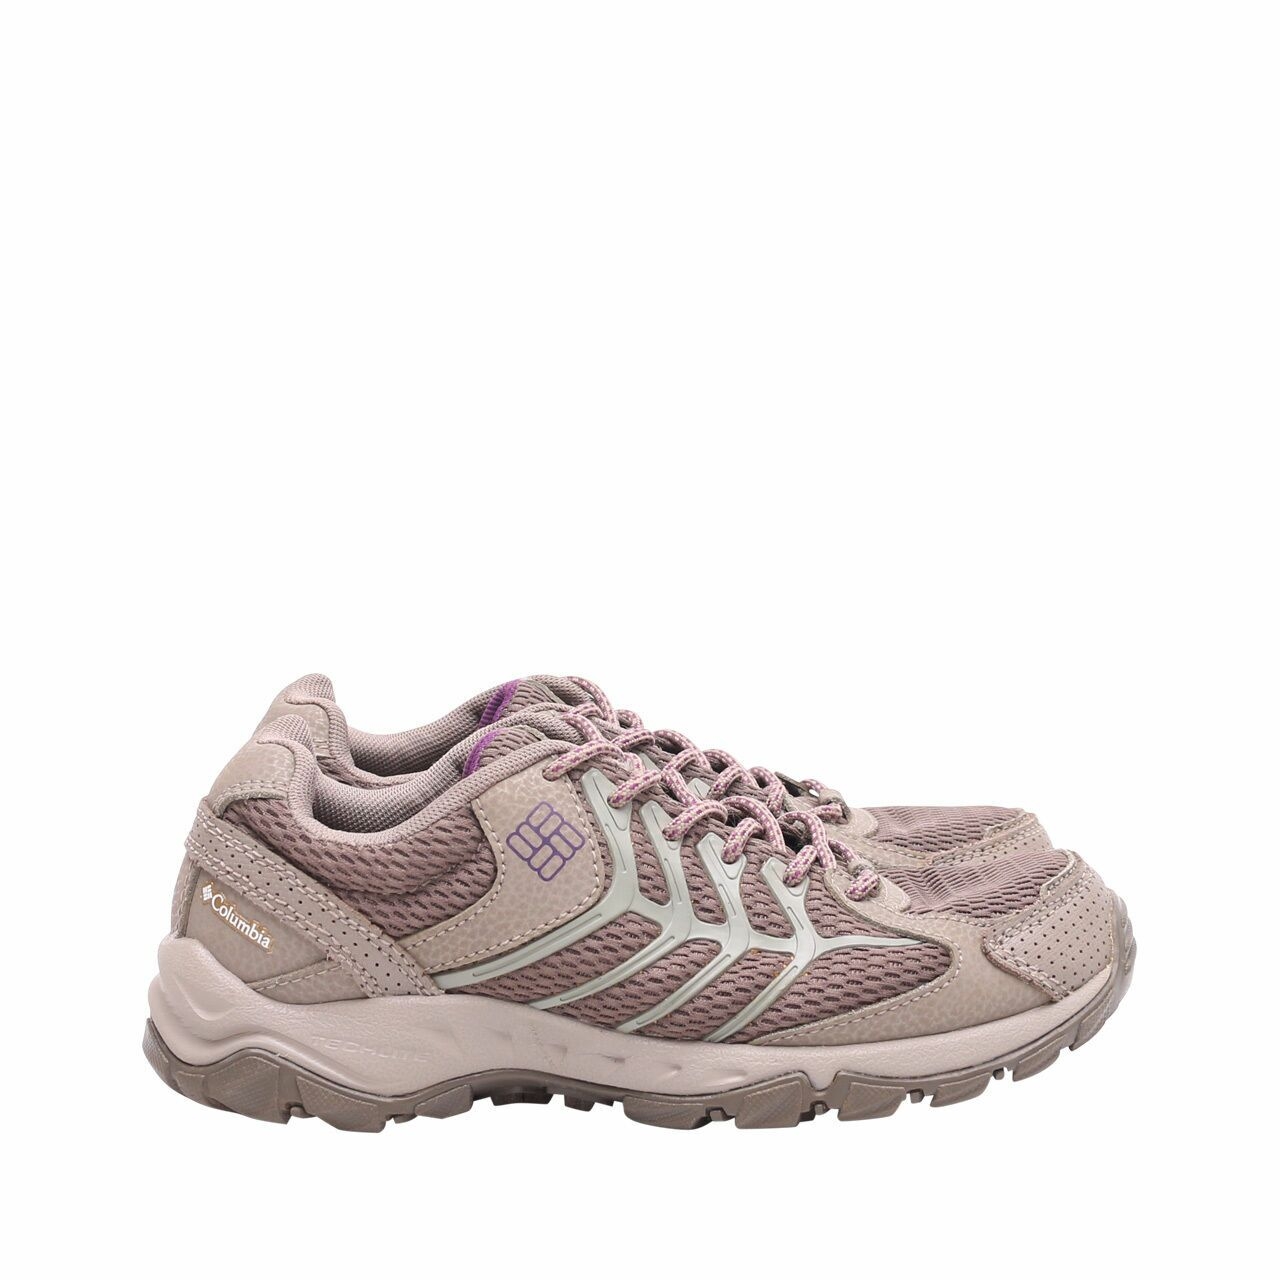 Columbia Taupe Sneakers